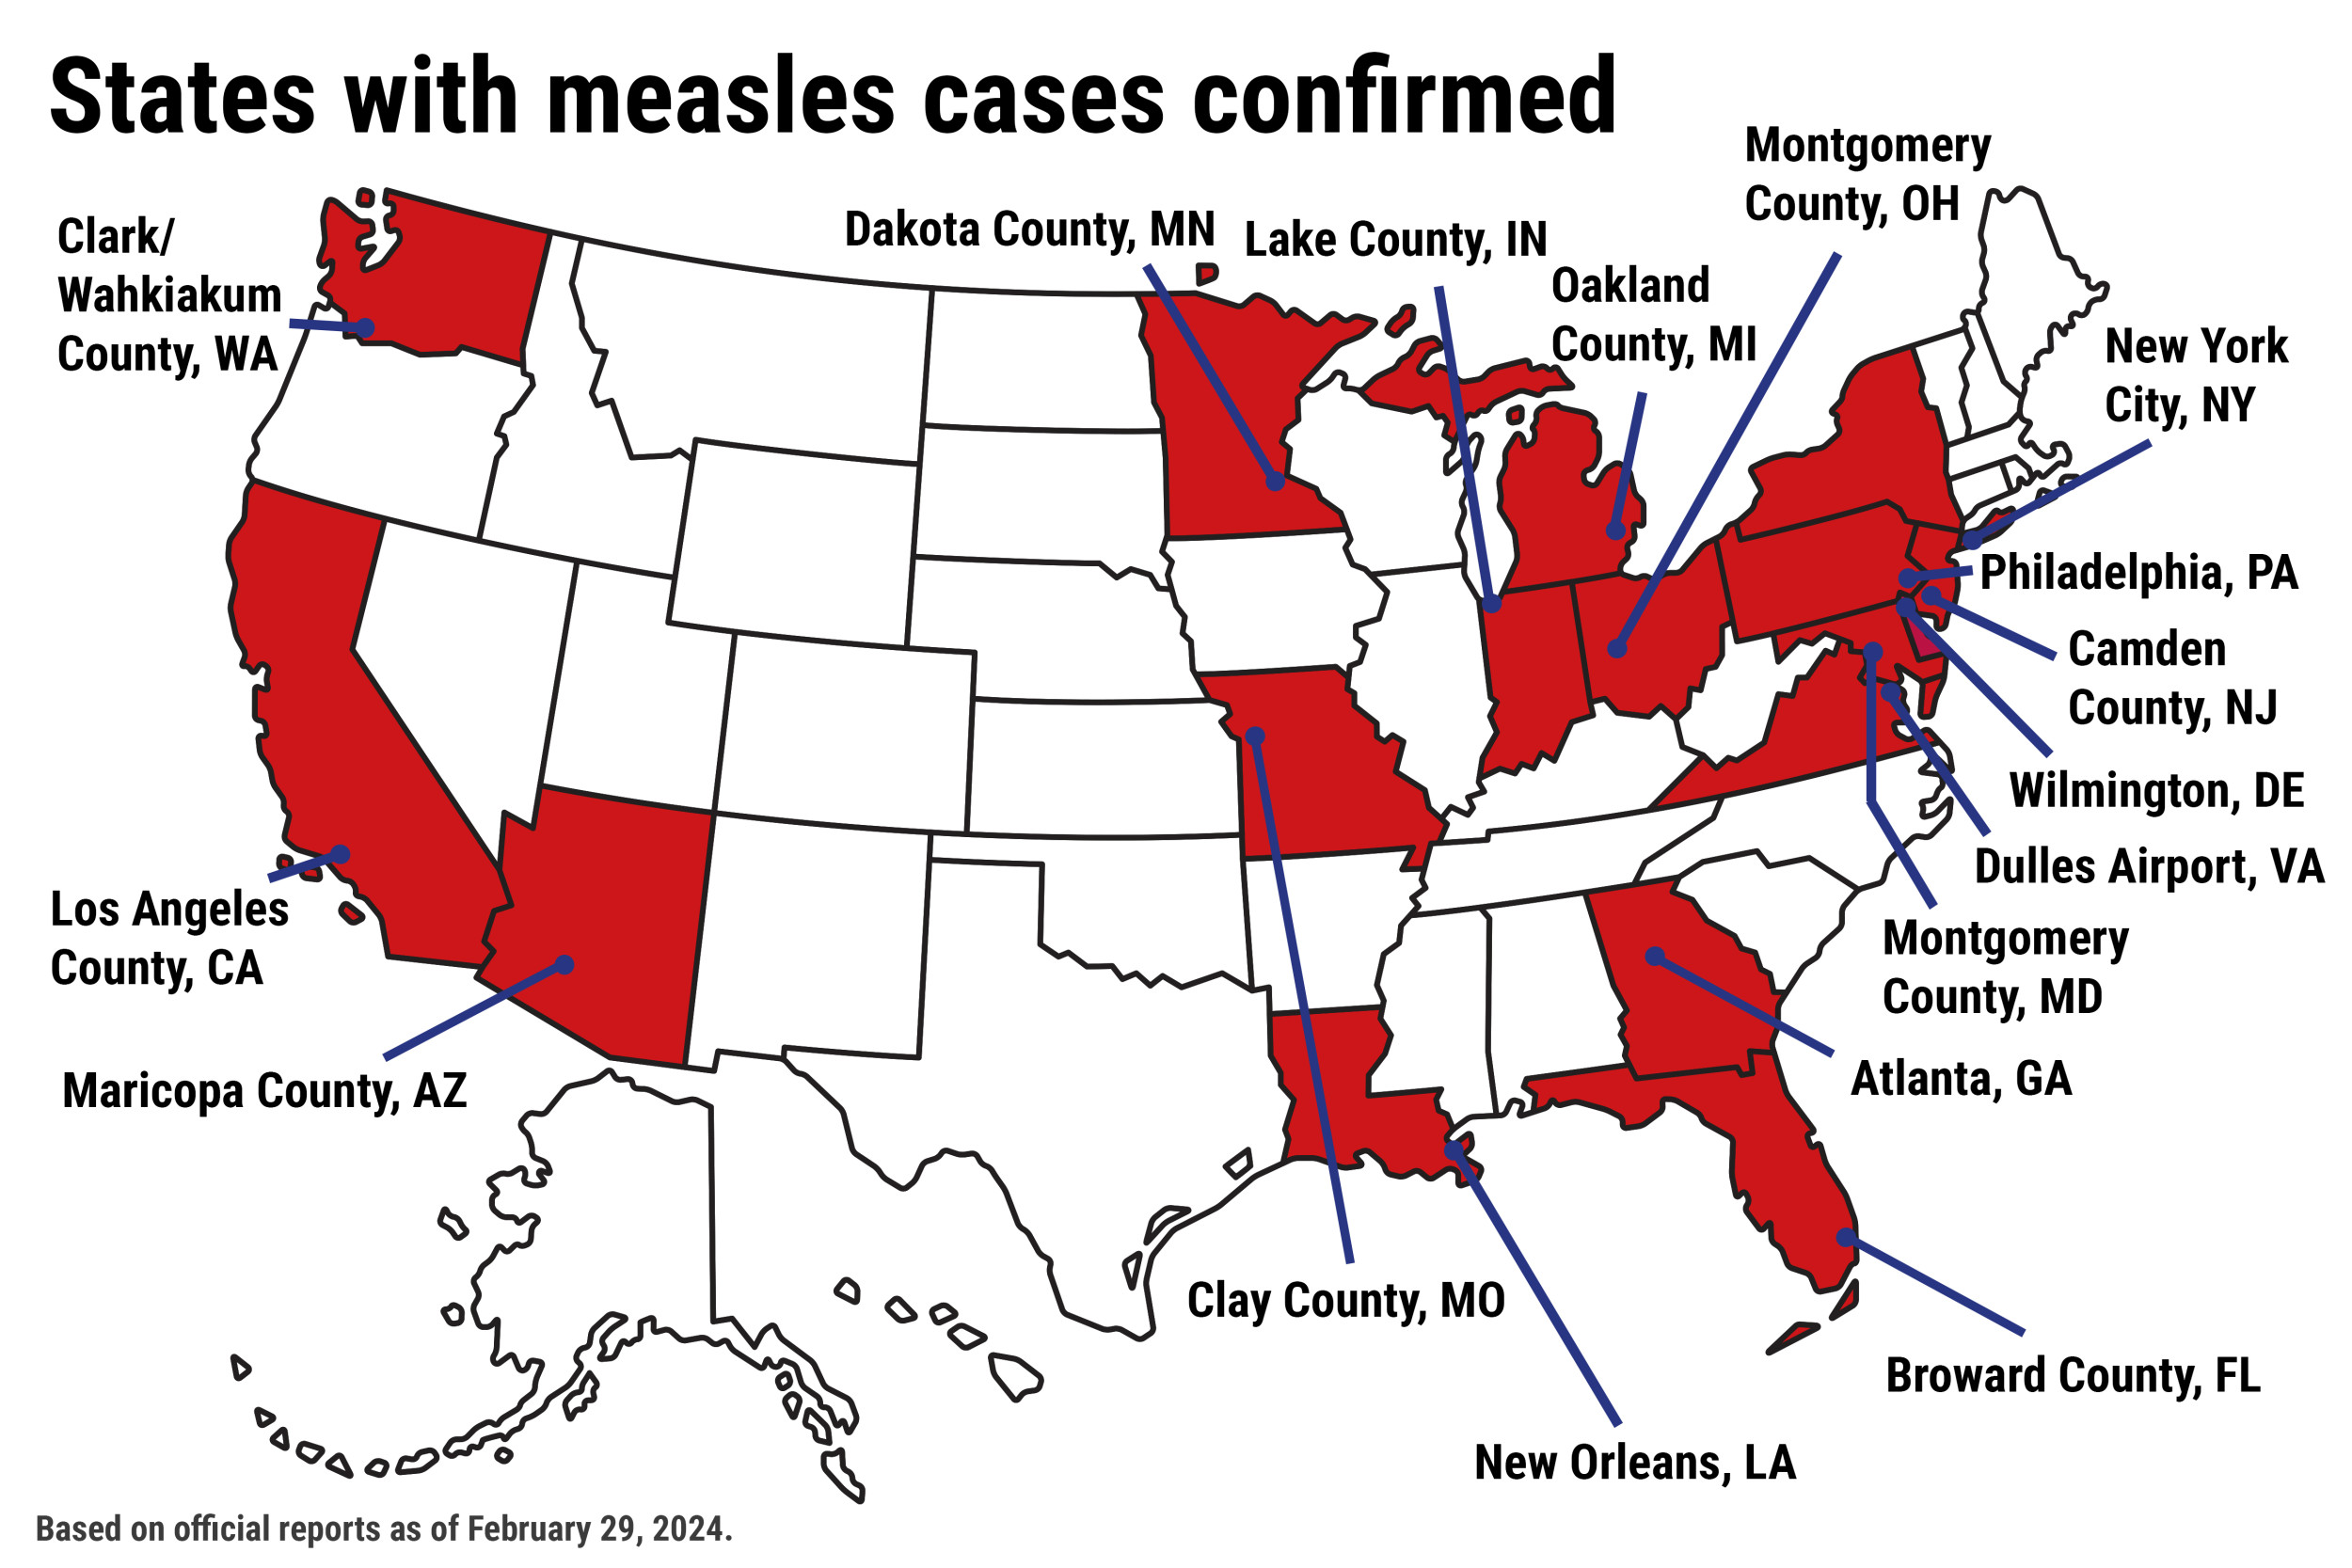 measles outbreak map shows 17 states with reported cases